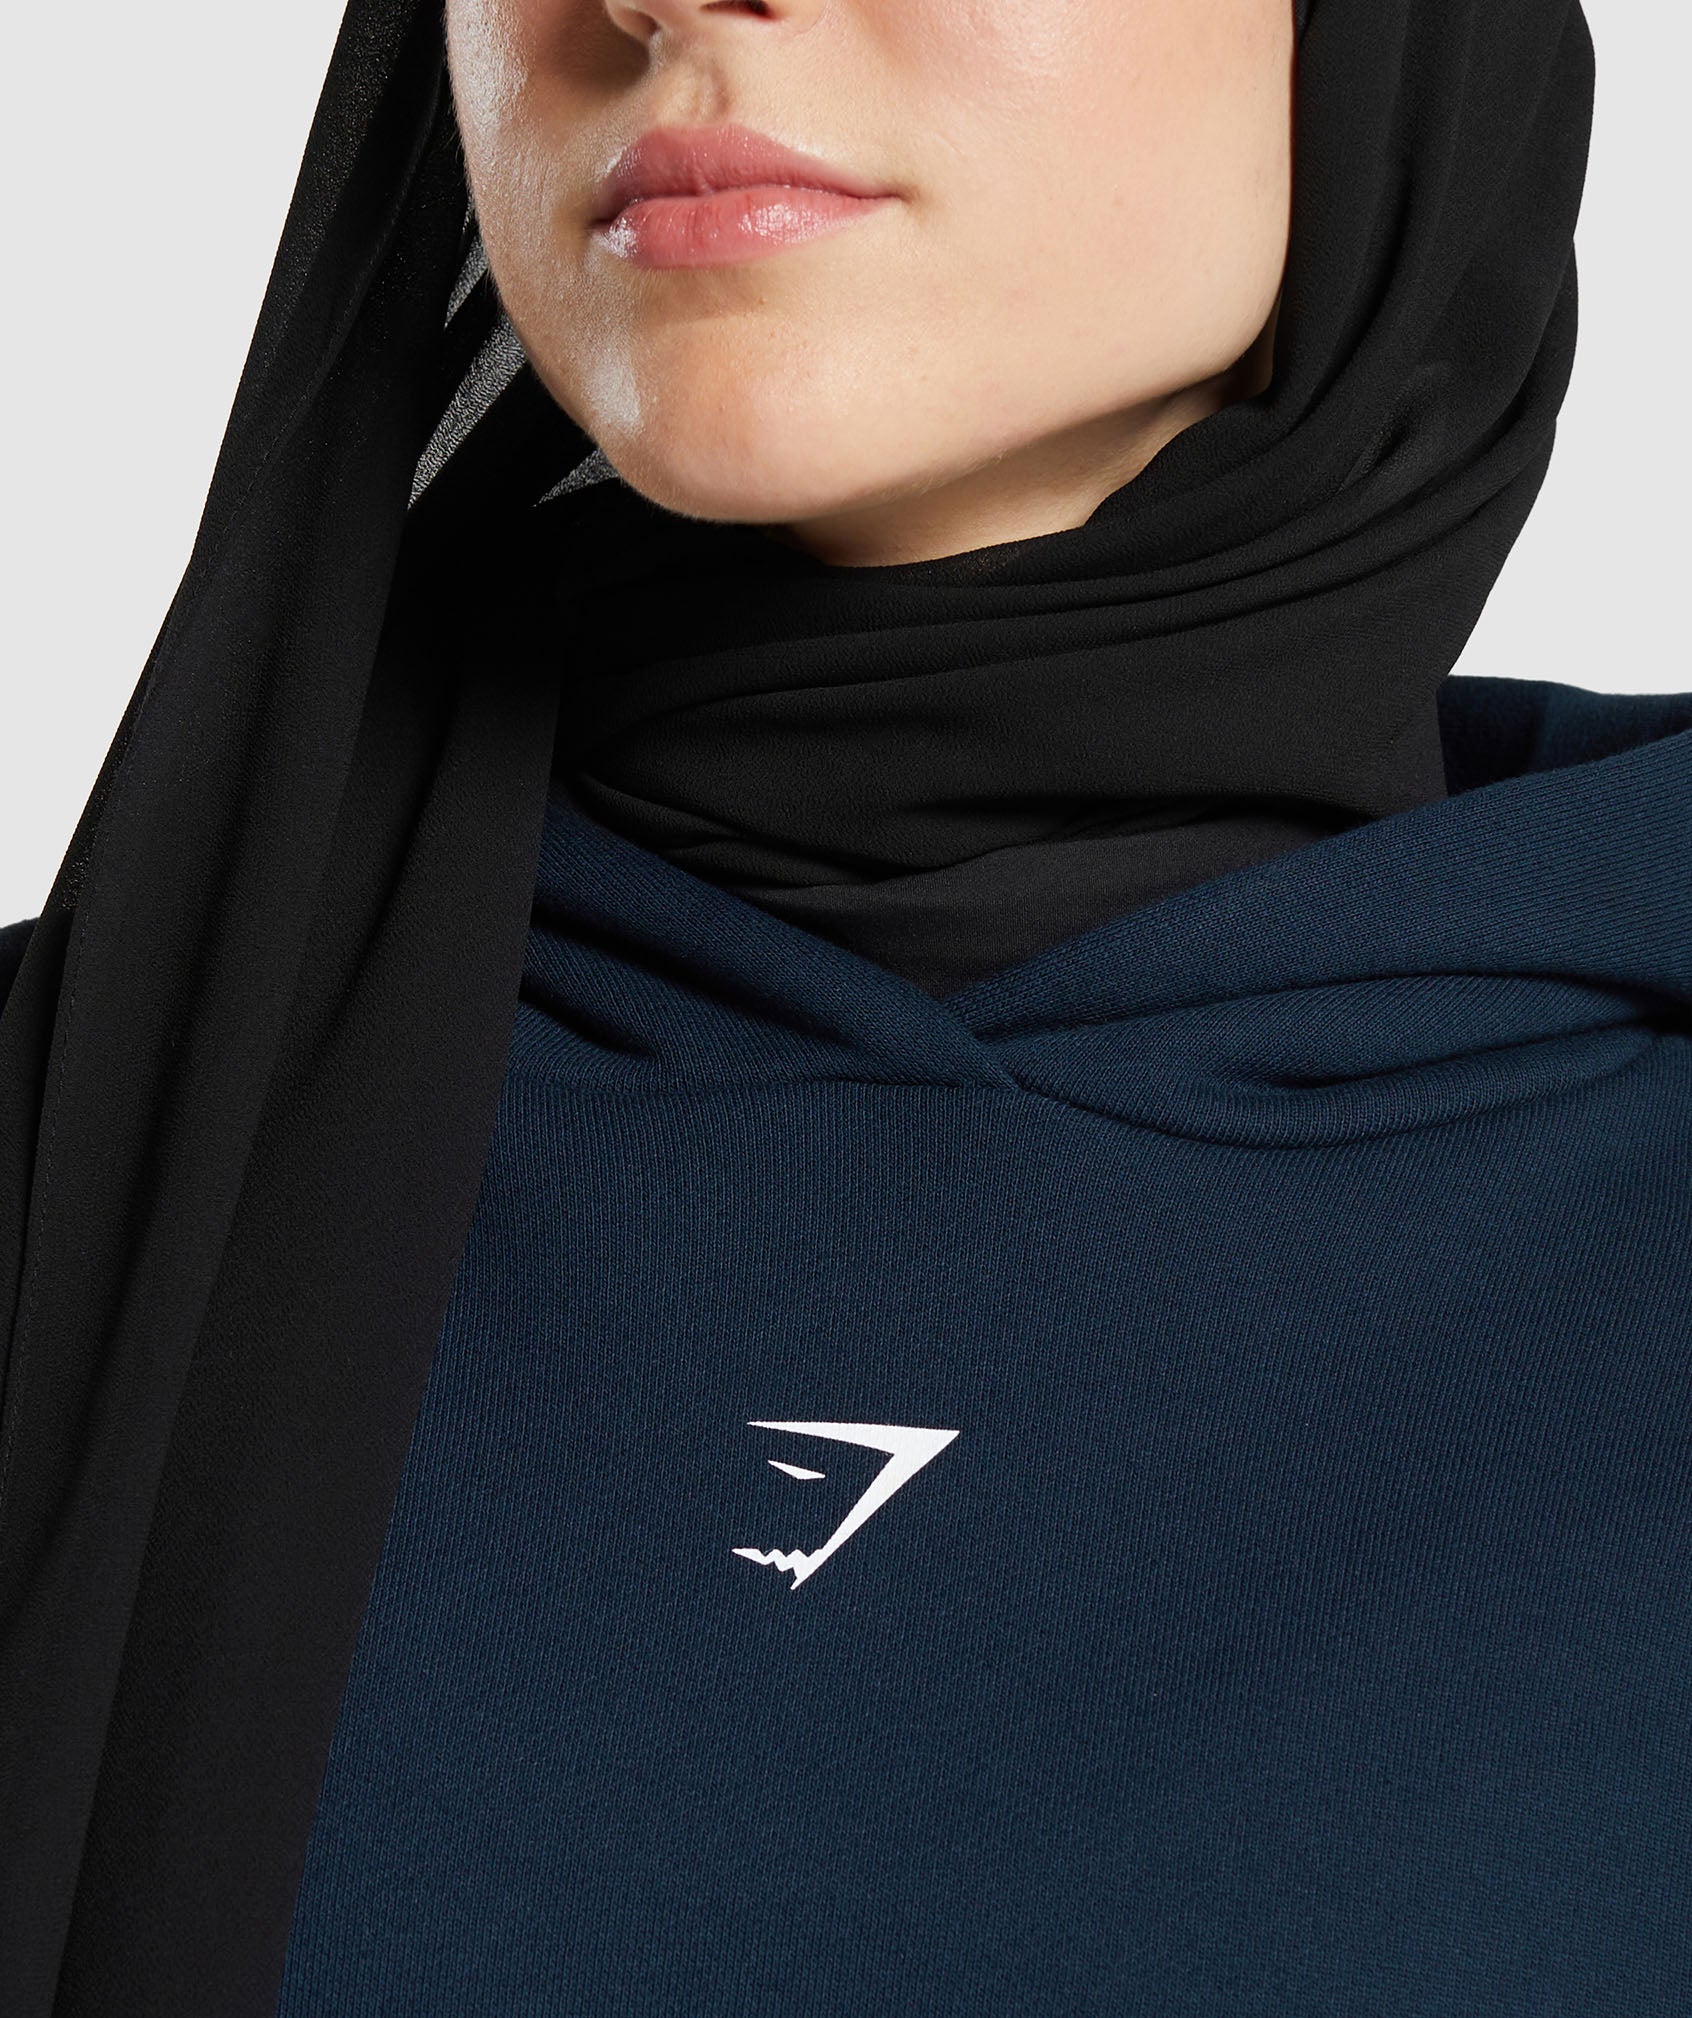 GS X Leana Deeb Oversized Graphic Hoodie in Navy - view 6